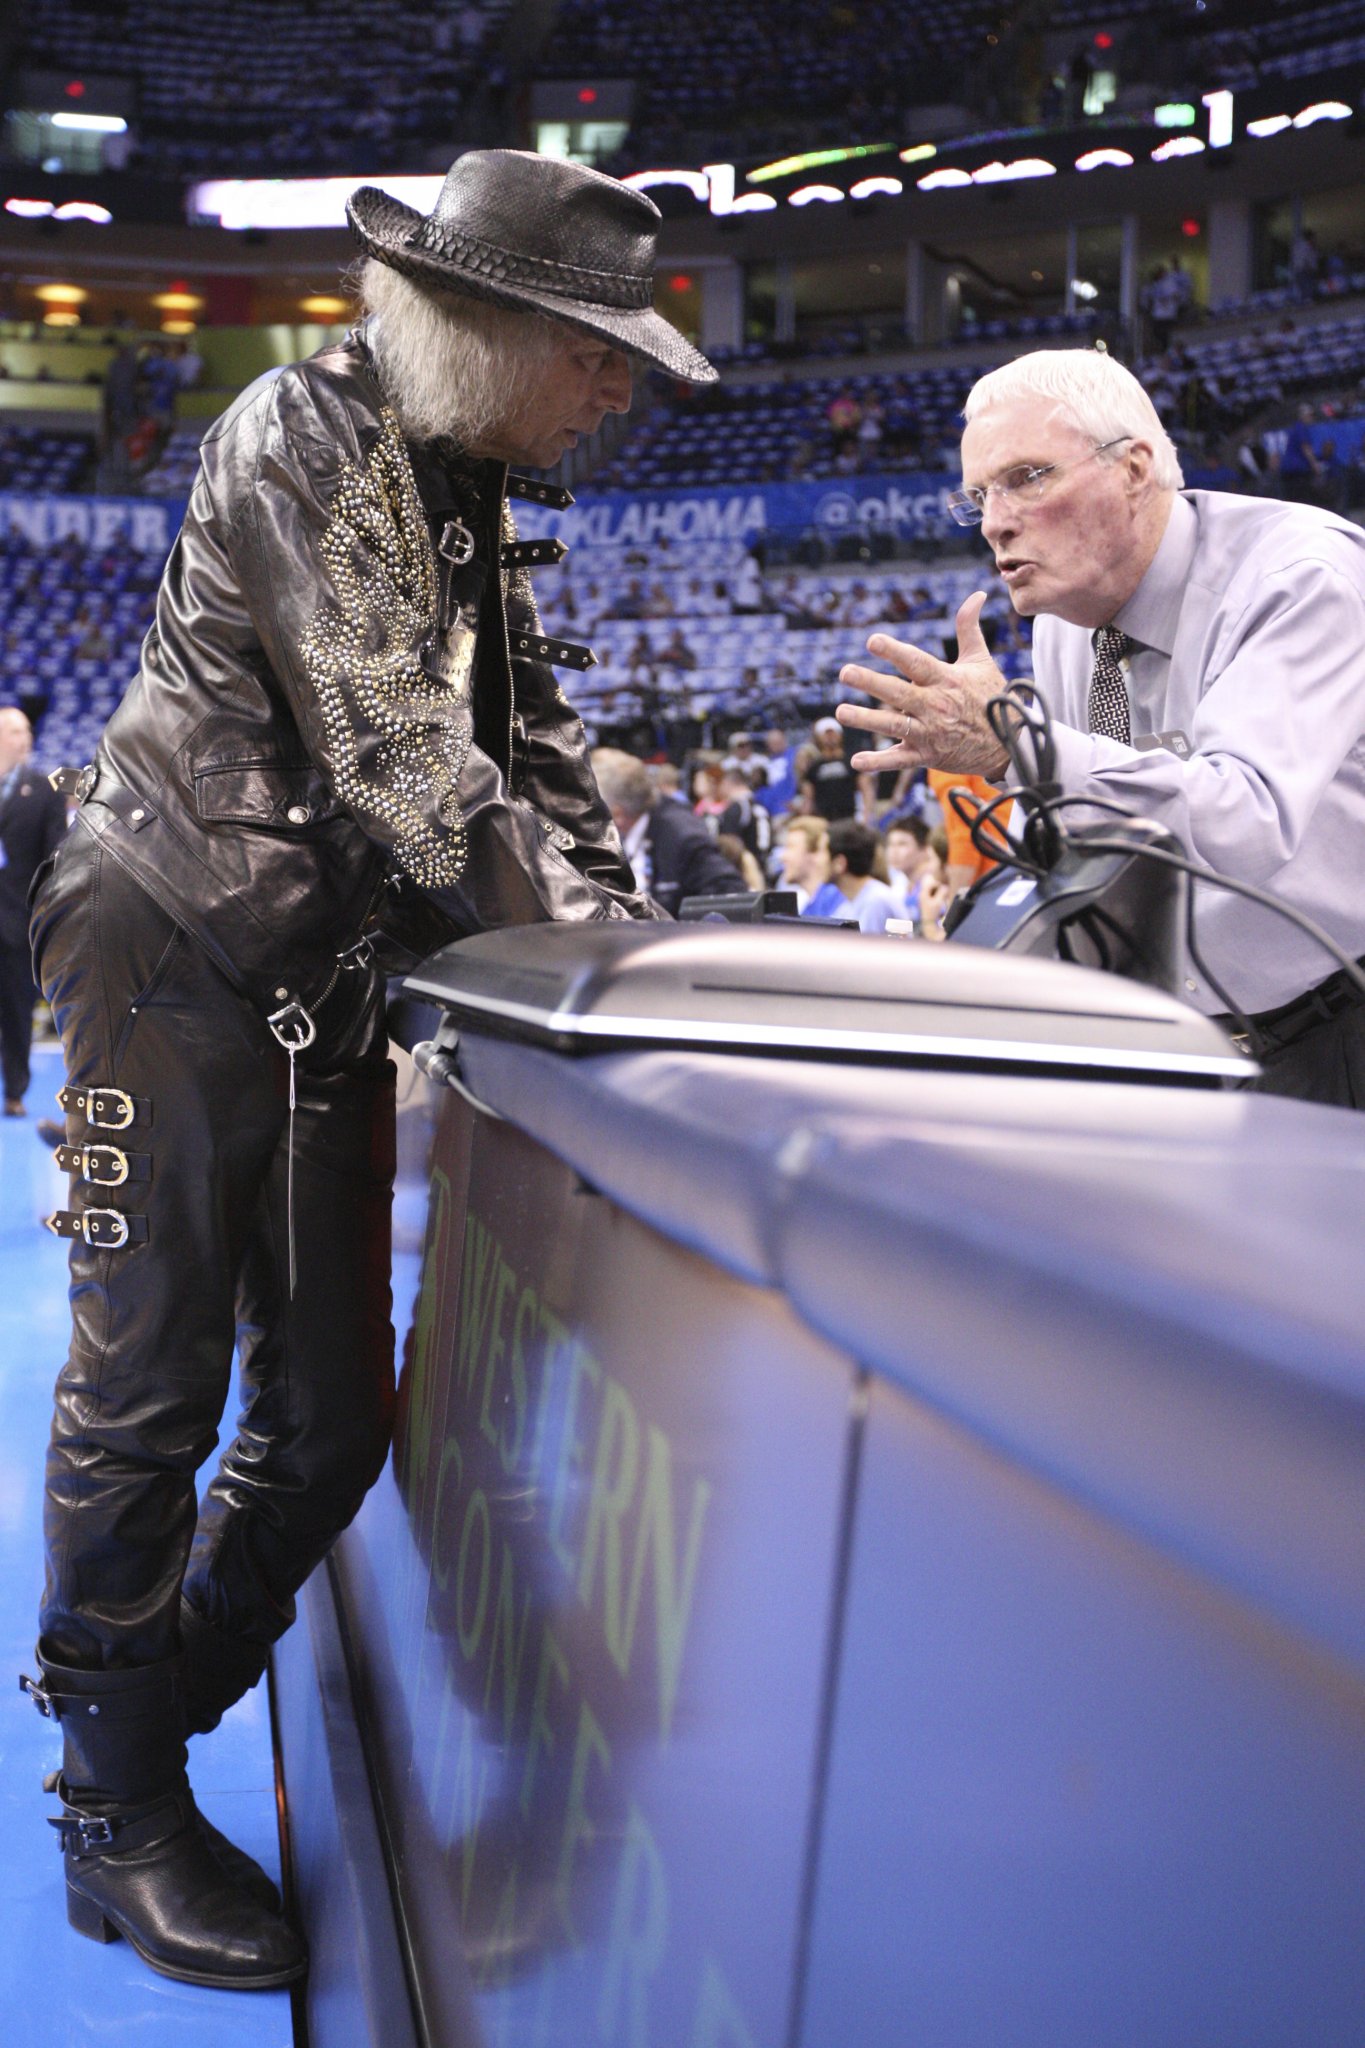 Quick Two: Spurs-Warriors game preview with Hubie Brown